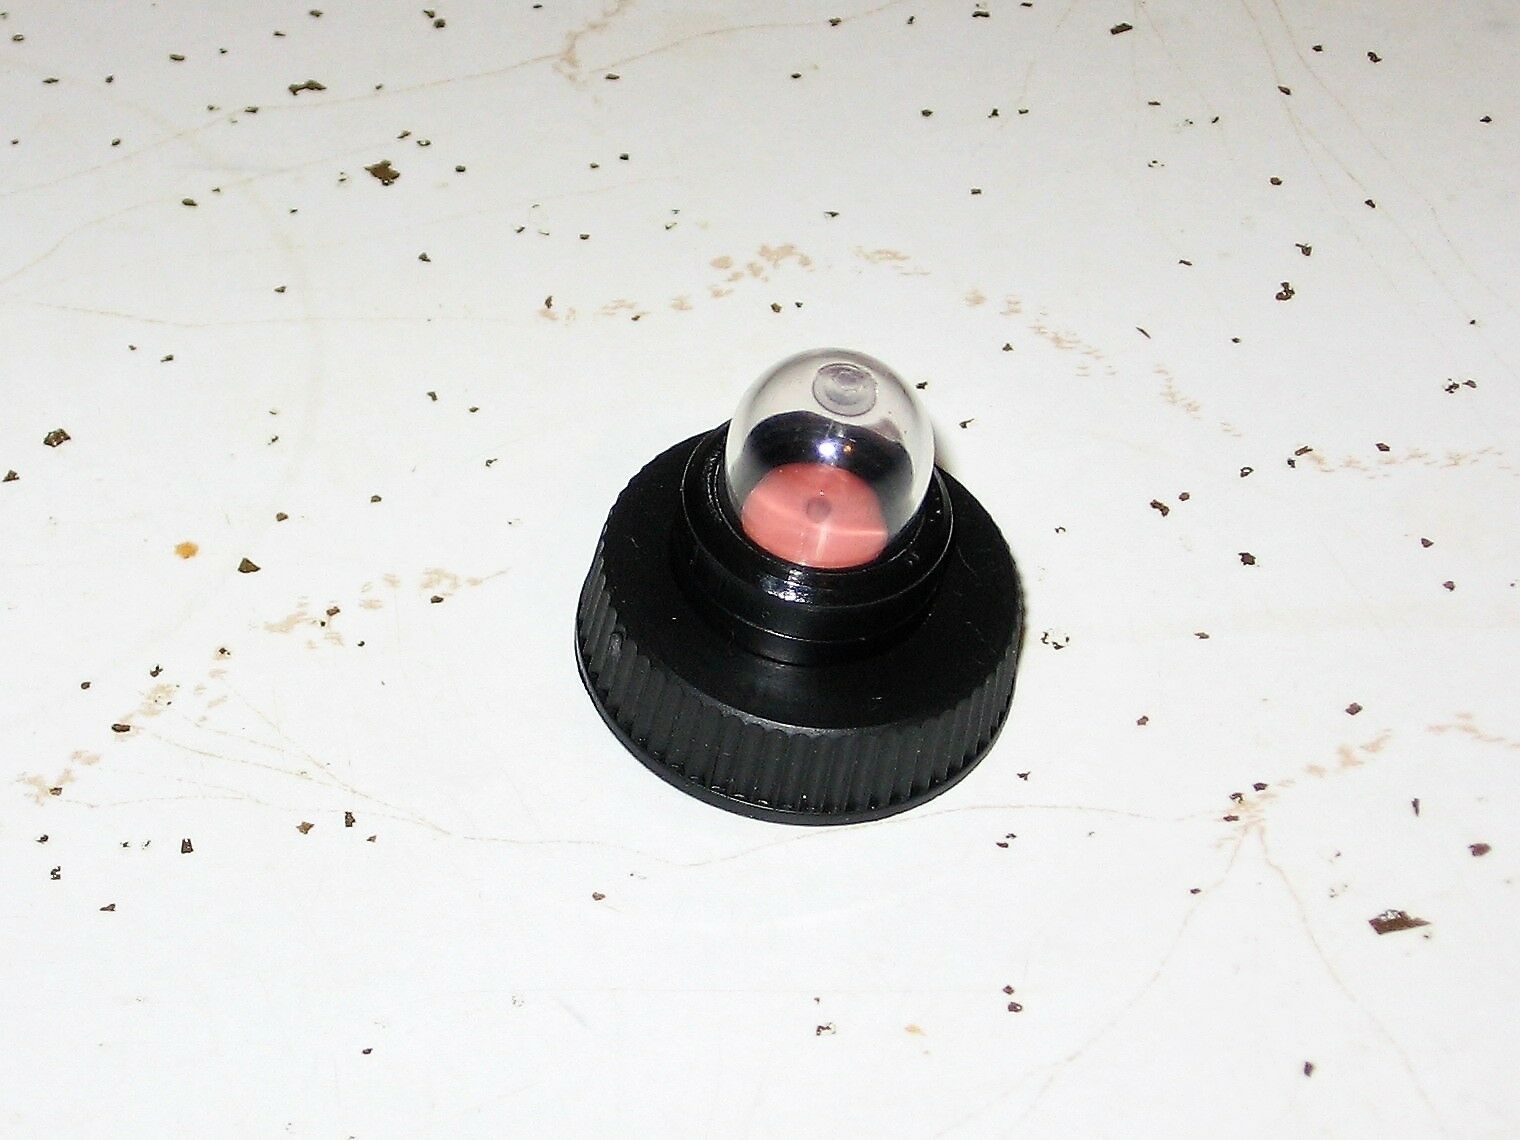 Homelite Xl Chainsaw Fuel / Gas Cap With Primer Bulb #a01372a, #up05955